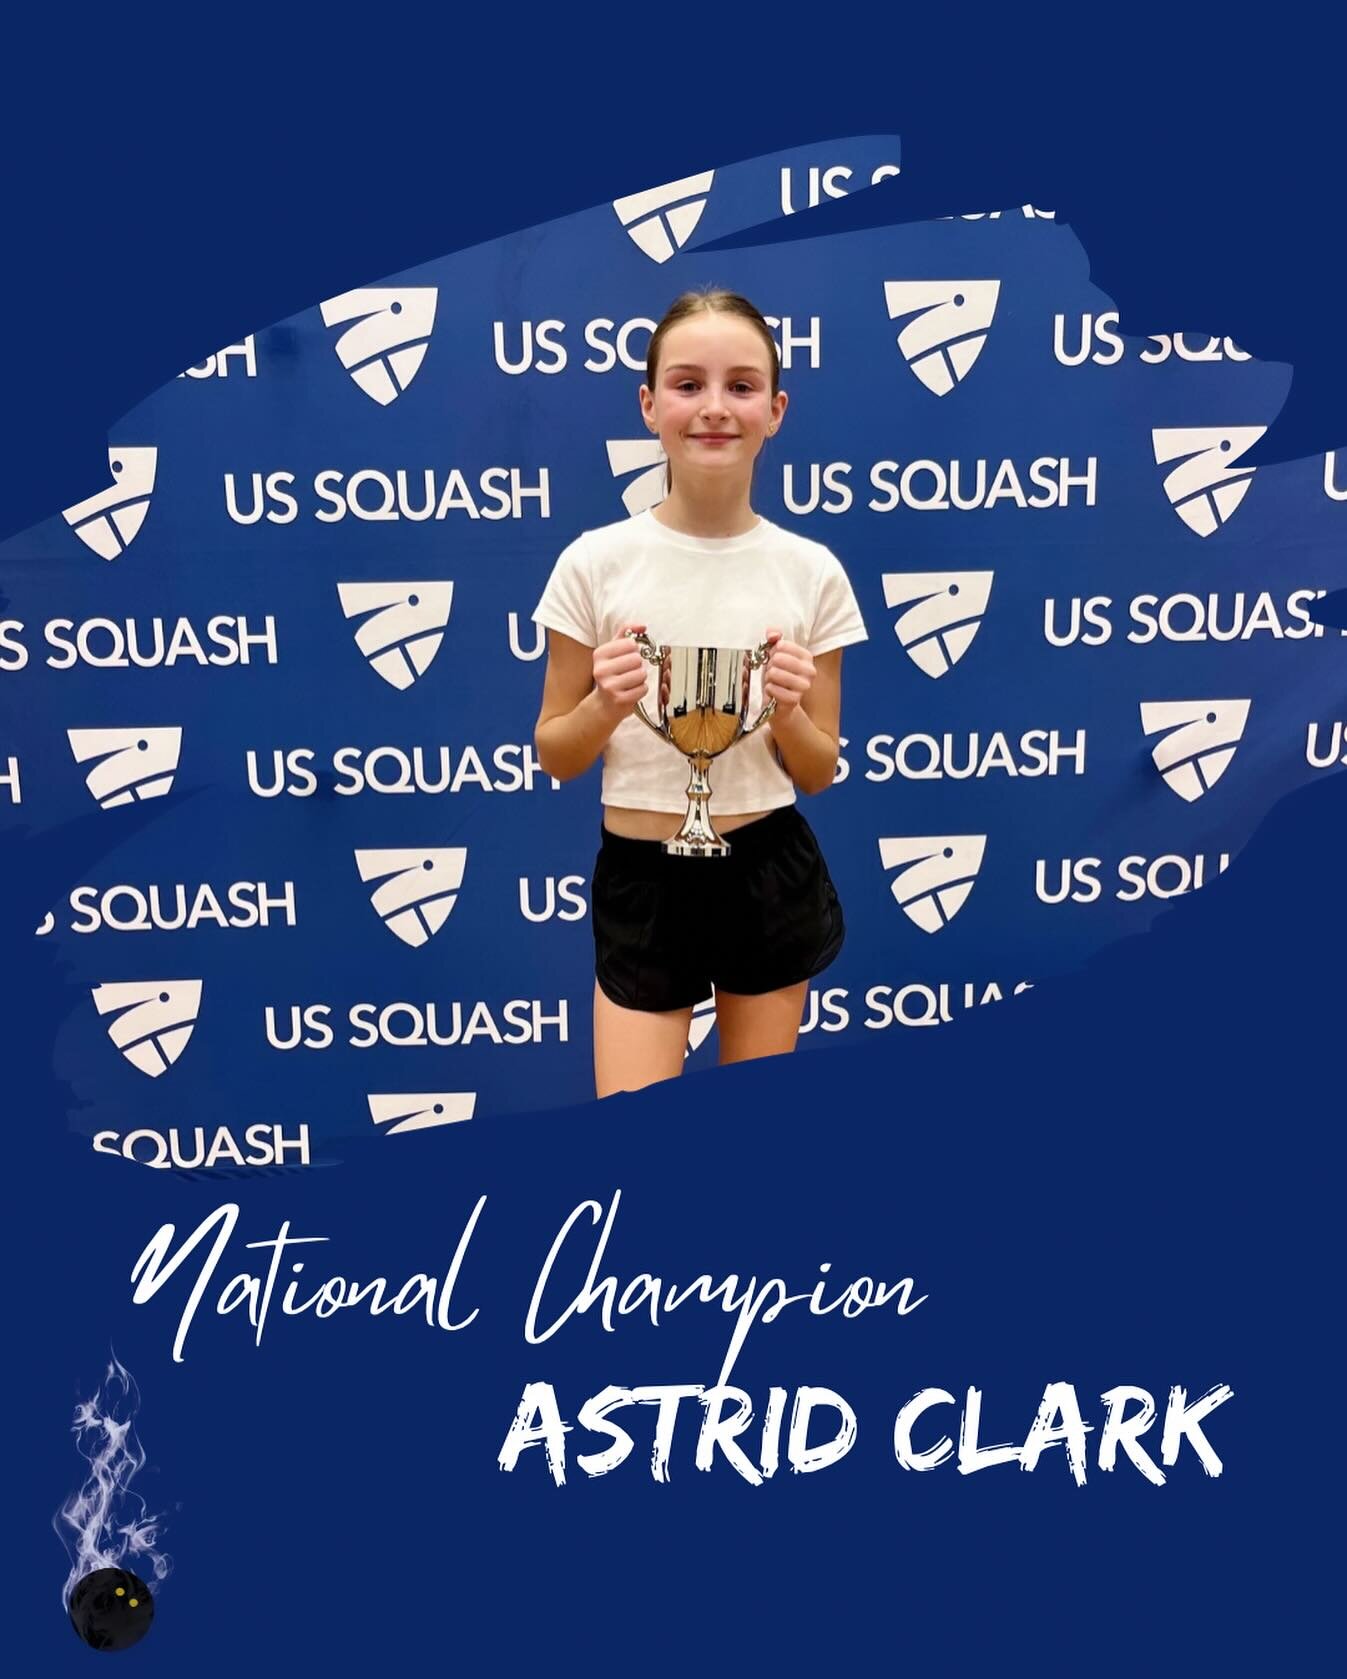 A week ago Astrid went down to Philly and claimed the Silver Nationals Title in the GU11! We are so proud of everything you&rsquo;ve put in to become the person and competitor you are. Congratulations STRIIIIDDDD!!
.
@majaclark